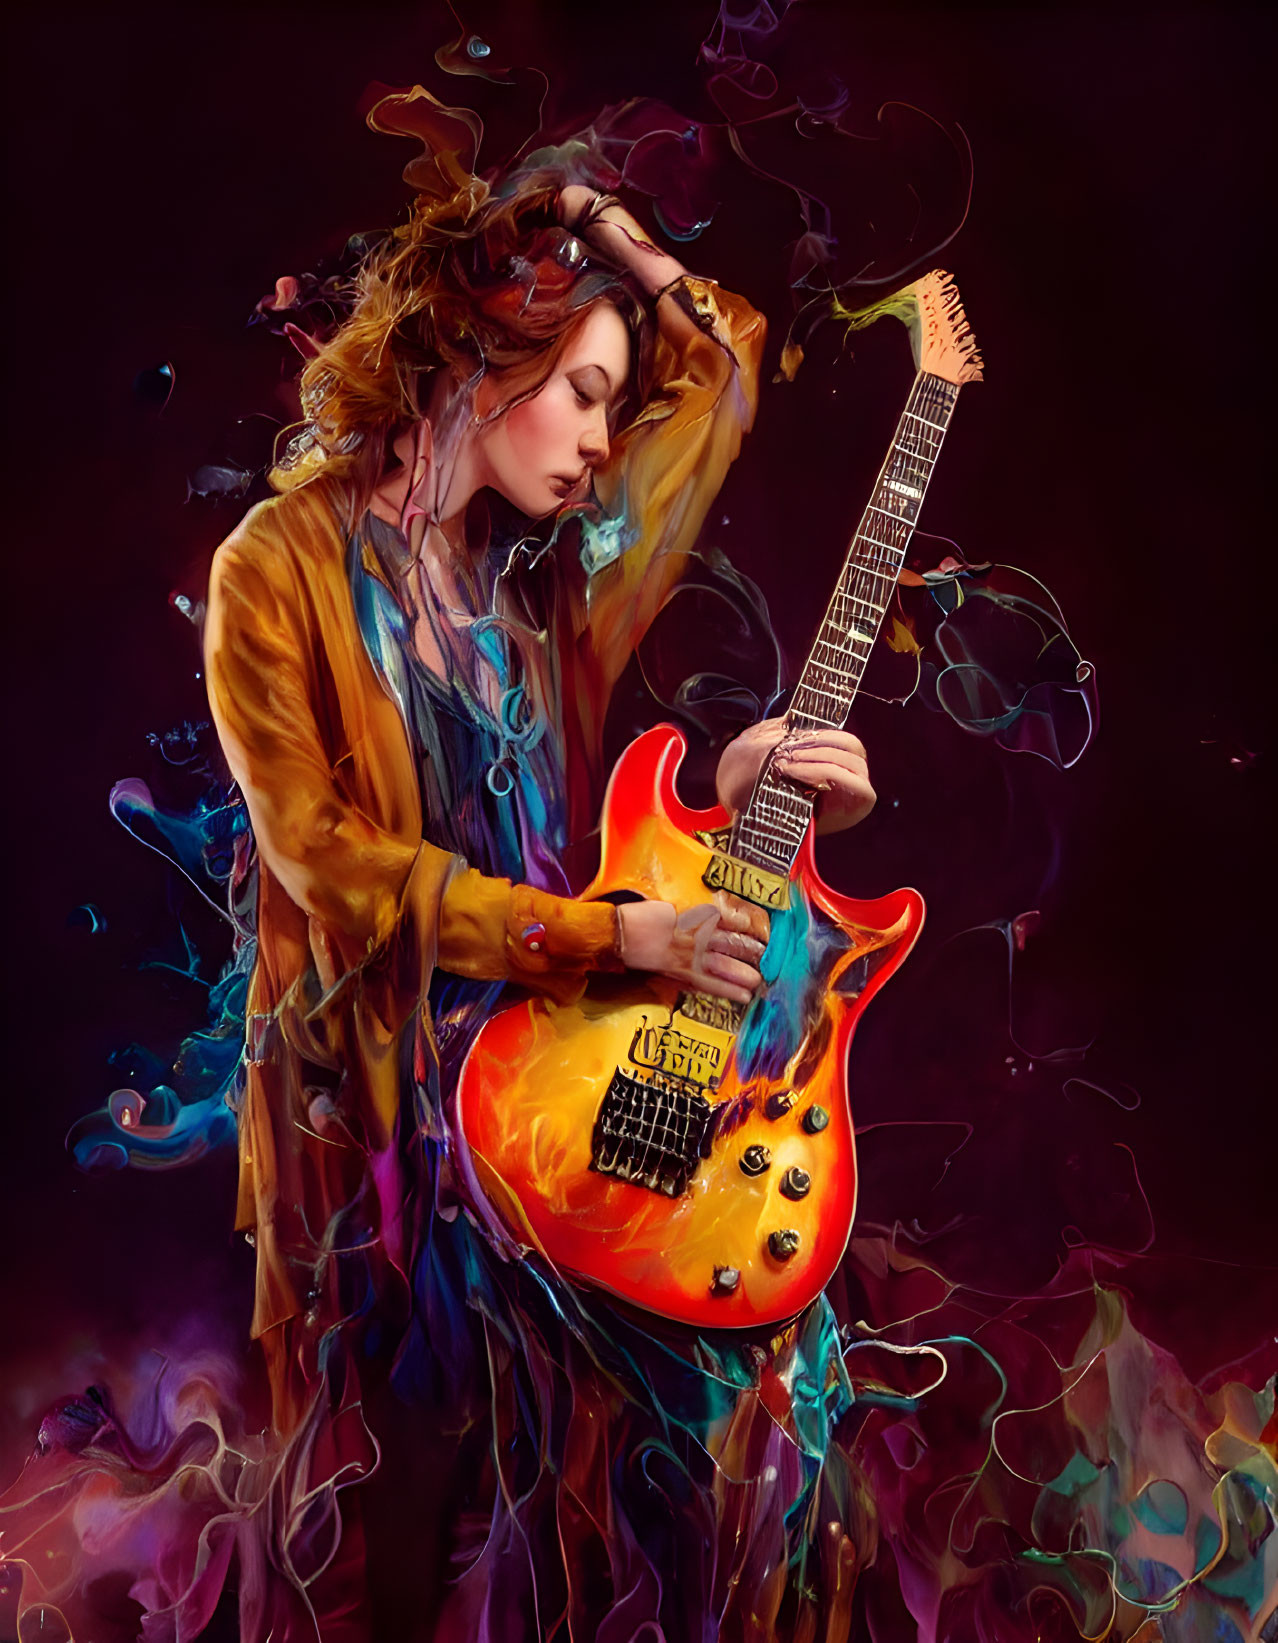 Person with Crown Playing Electric Guitar in Vibrant Swirling Colors